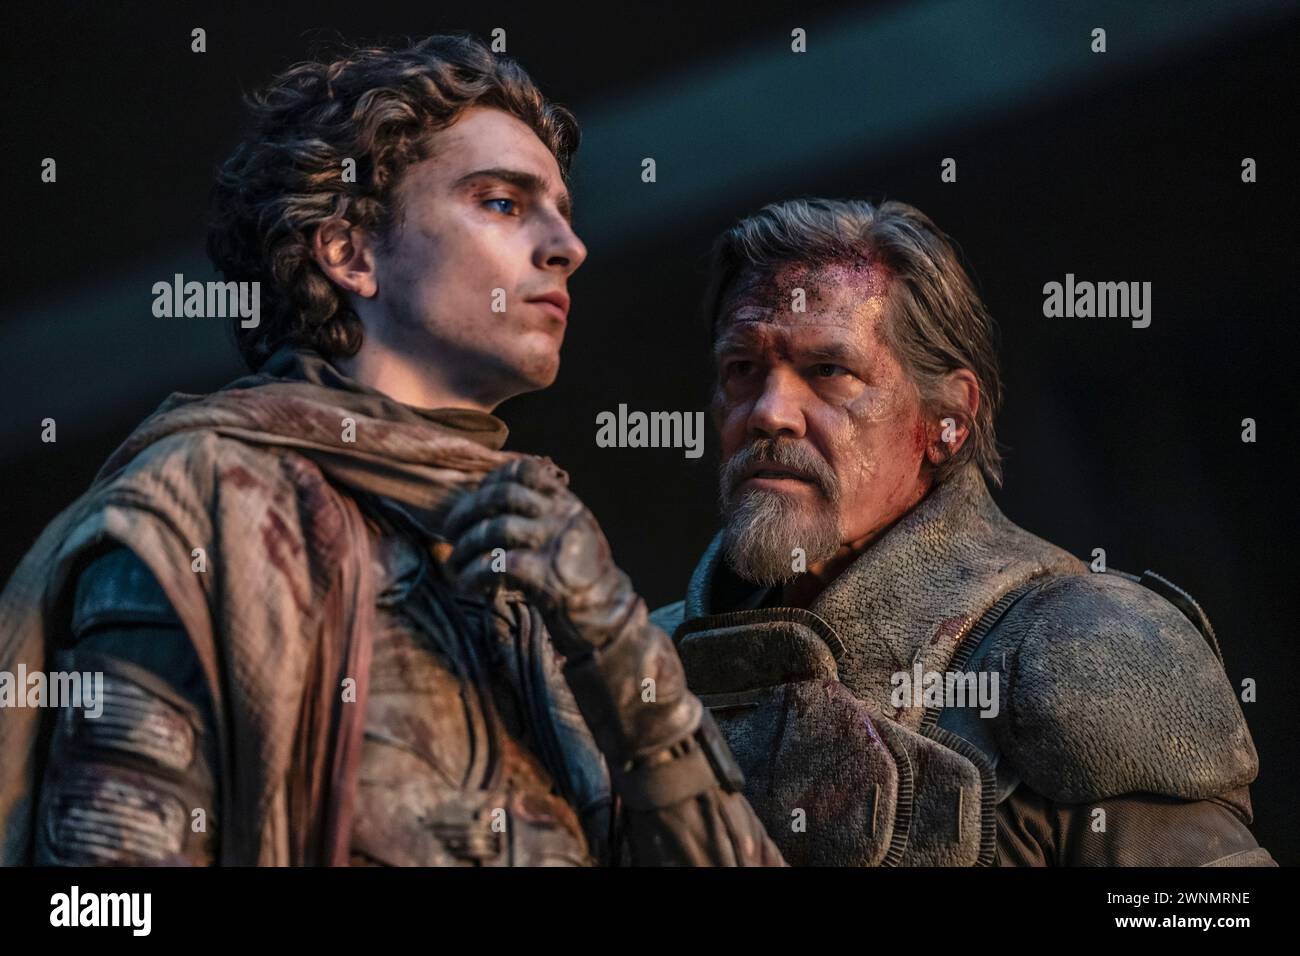 Dune: Part Two (2024) directed by Denis Villeneuve and starring Timothée Chalamet as Paul Atredies and Josh Brolin as Gurney Halleck. Part 2 of the adaptation of Frank Herbert's sci-fi masterpiece. Paul Atreides unites with Chani and the Fremen while seeking revenge against the conspirators who destroyed his family. Publicity still ***EDITORIAL USE ONLY***. Credit: BFA / Warner Bros Stock Photo